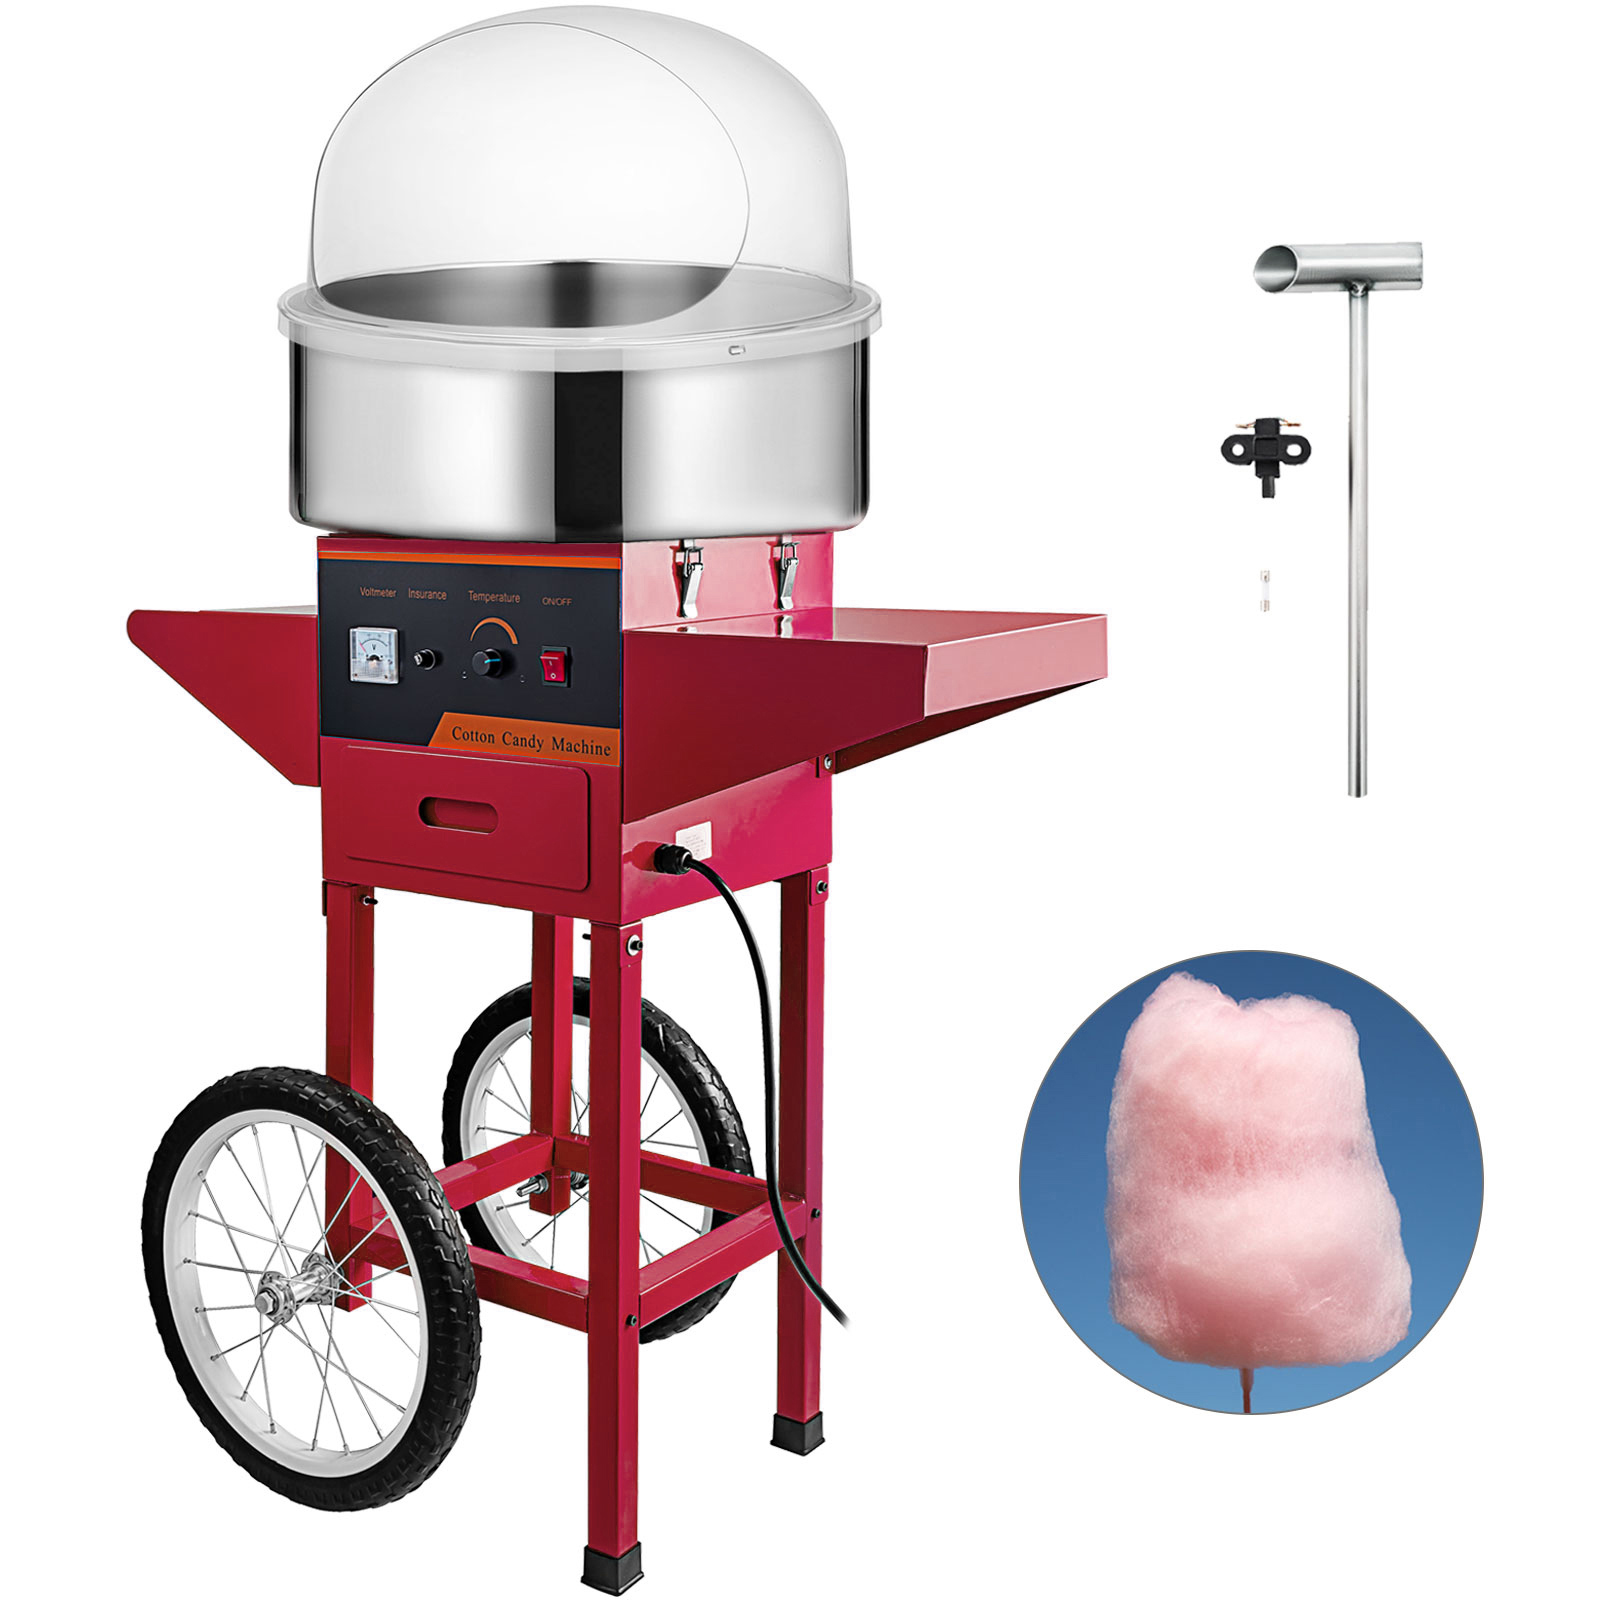 Cotton Candy Machine Cover,21 inch Diameter,Thickened Acrylic